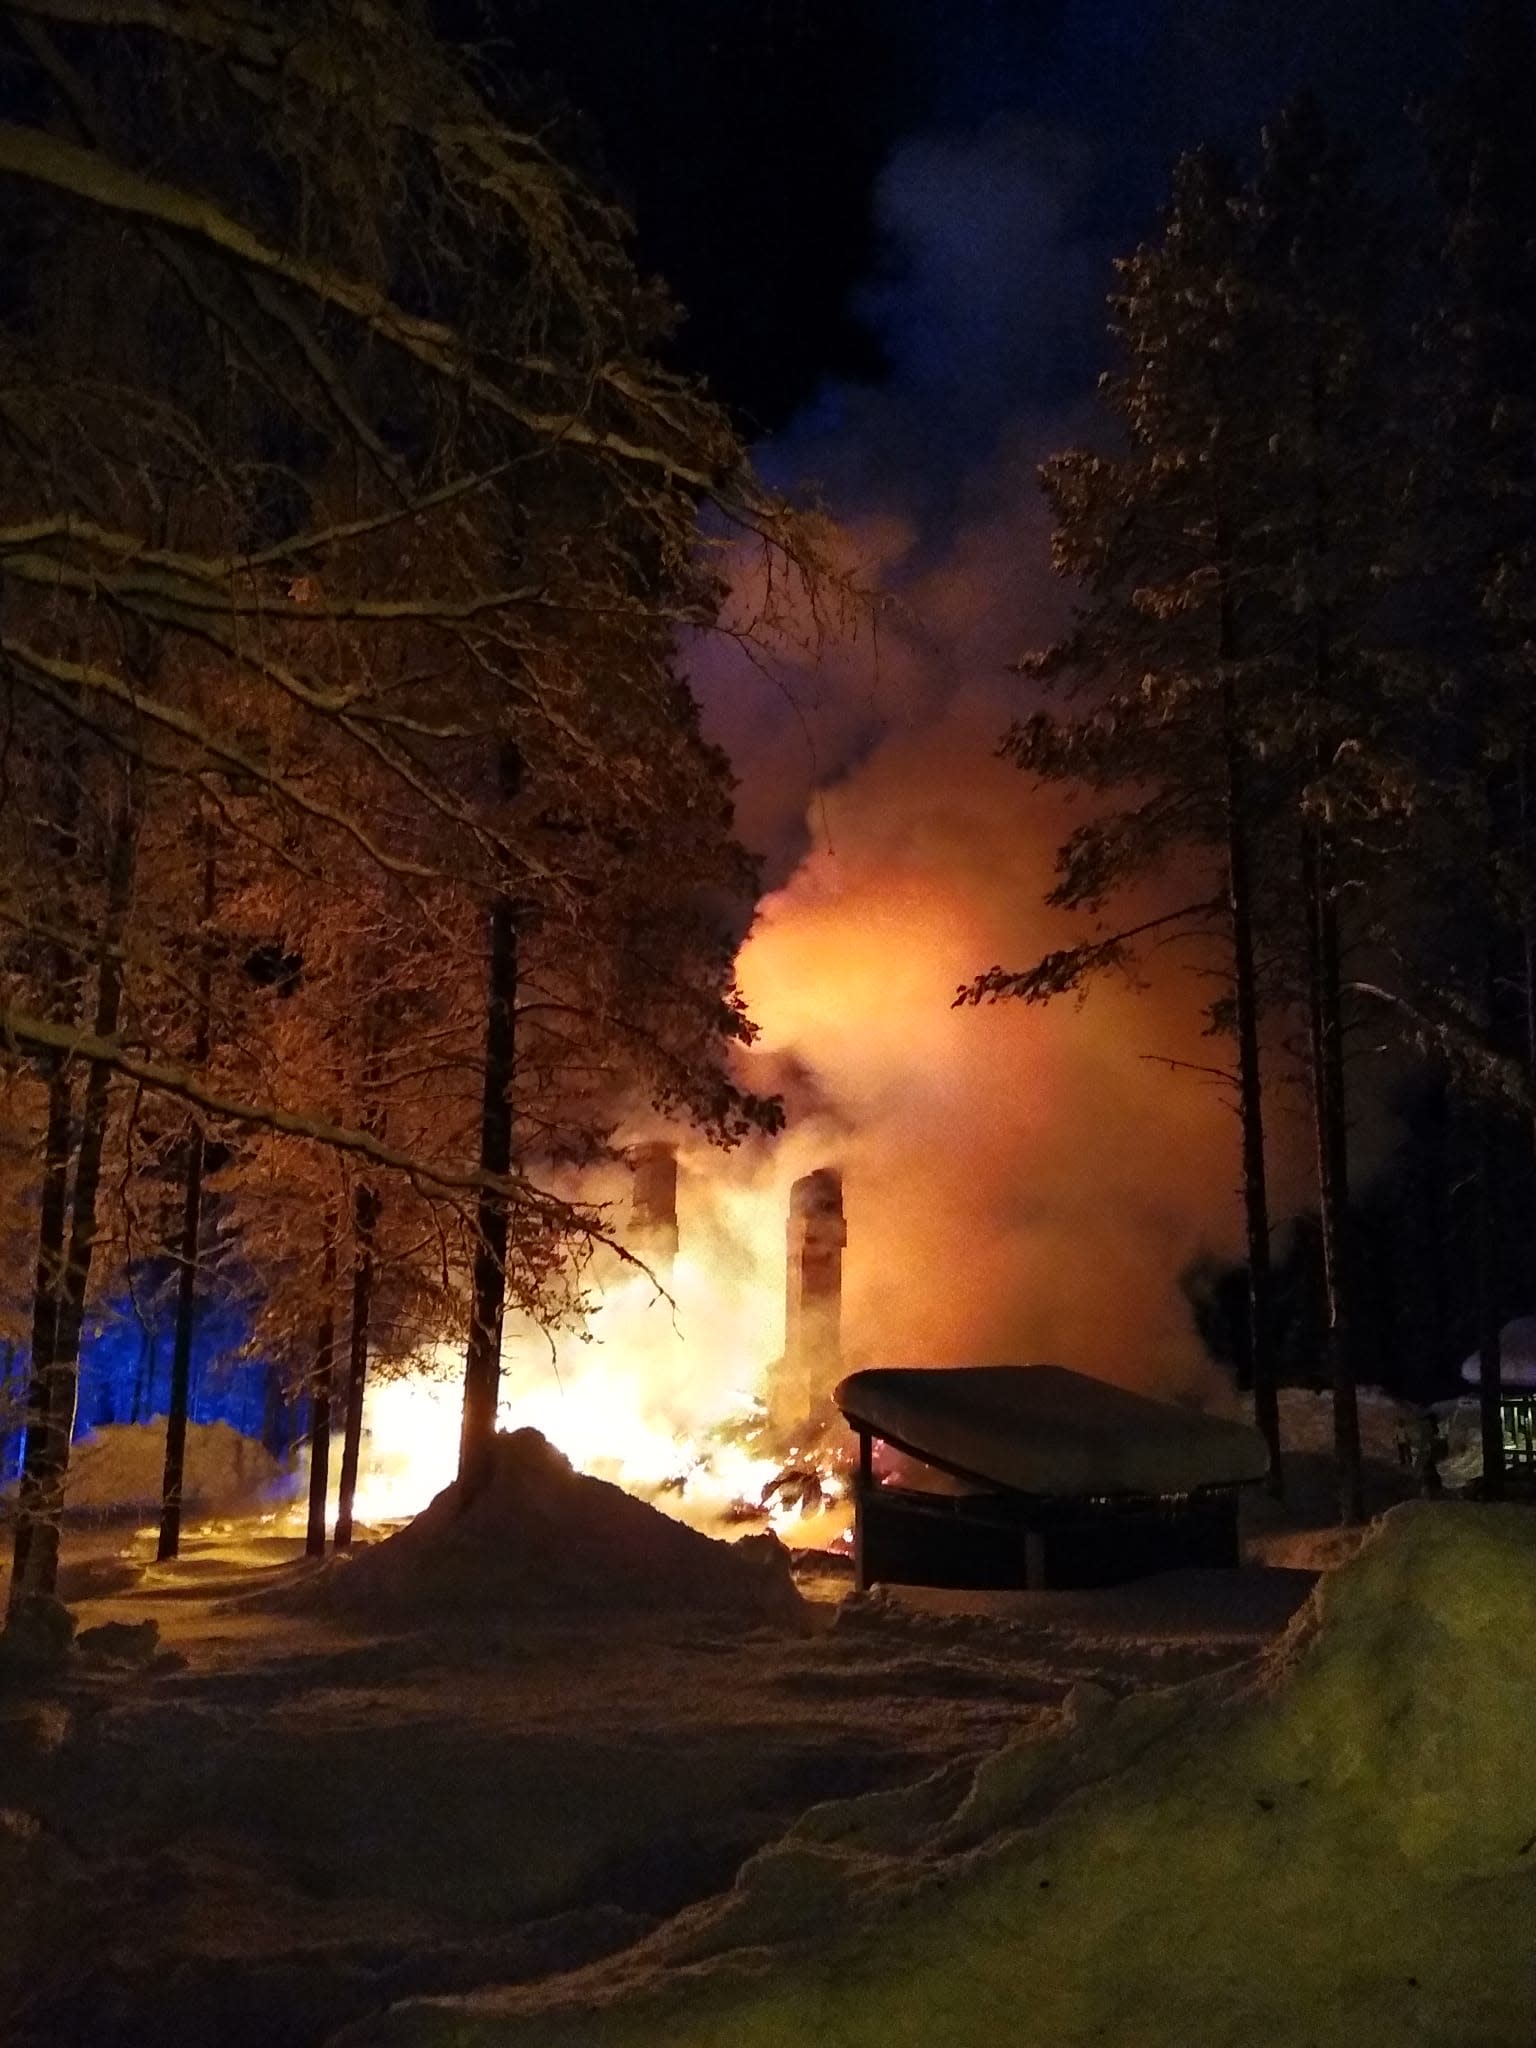 Researchers identify the likely cause of the hostel fire in Lapland